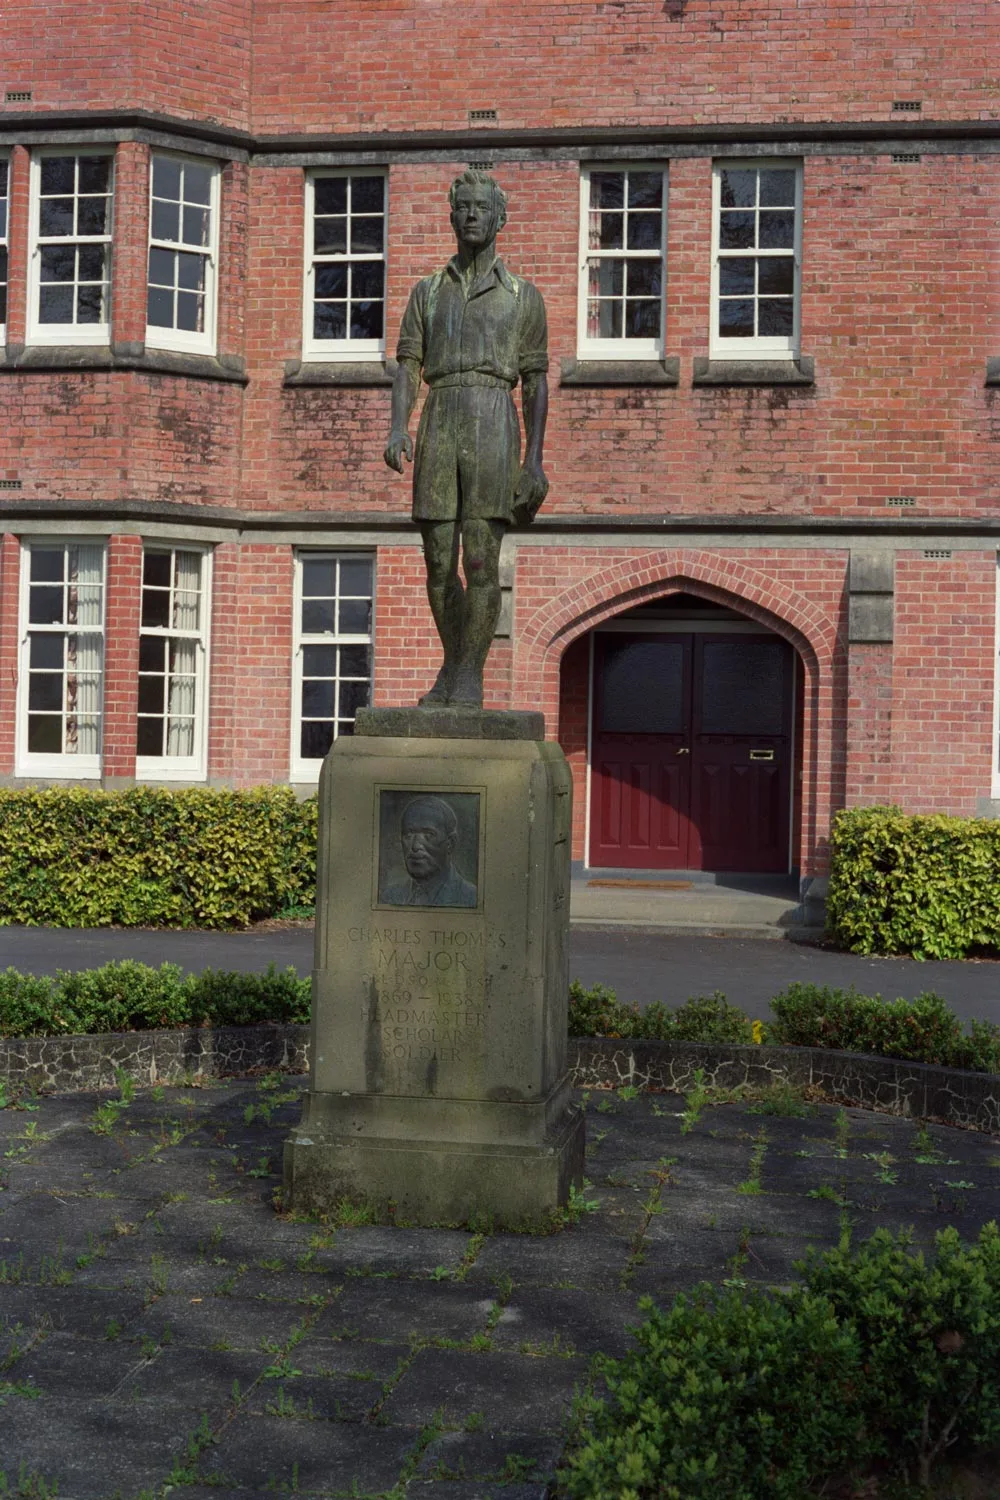 Kings College and the Charles Thomas statue, Golf Avenue, Otahuhu, Auckland